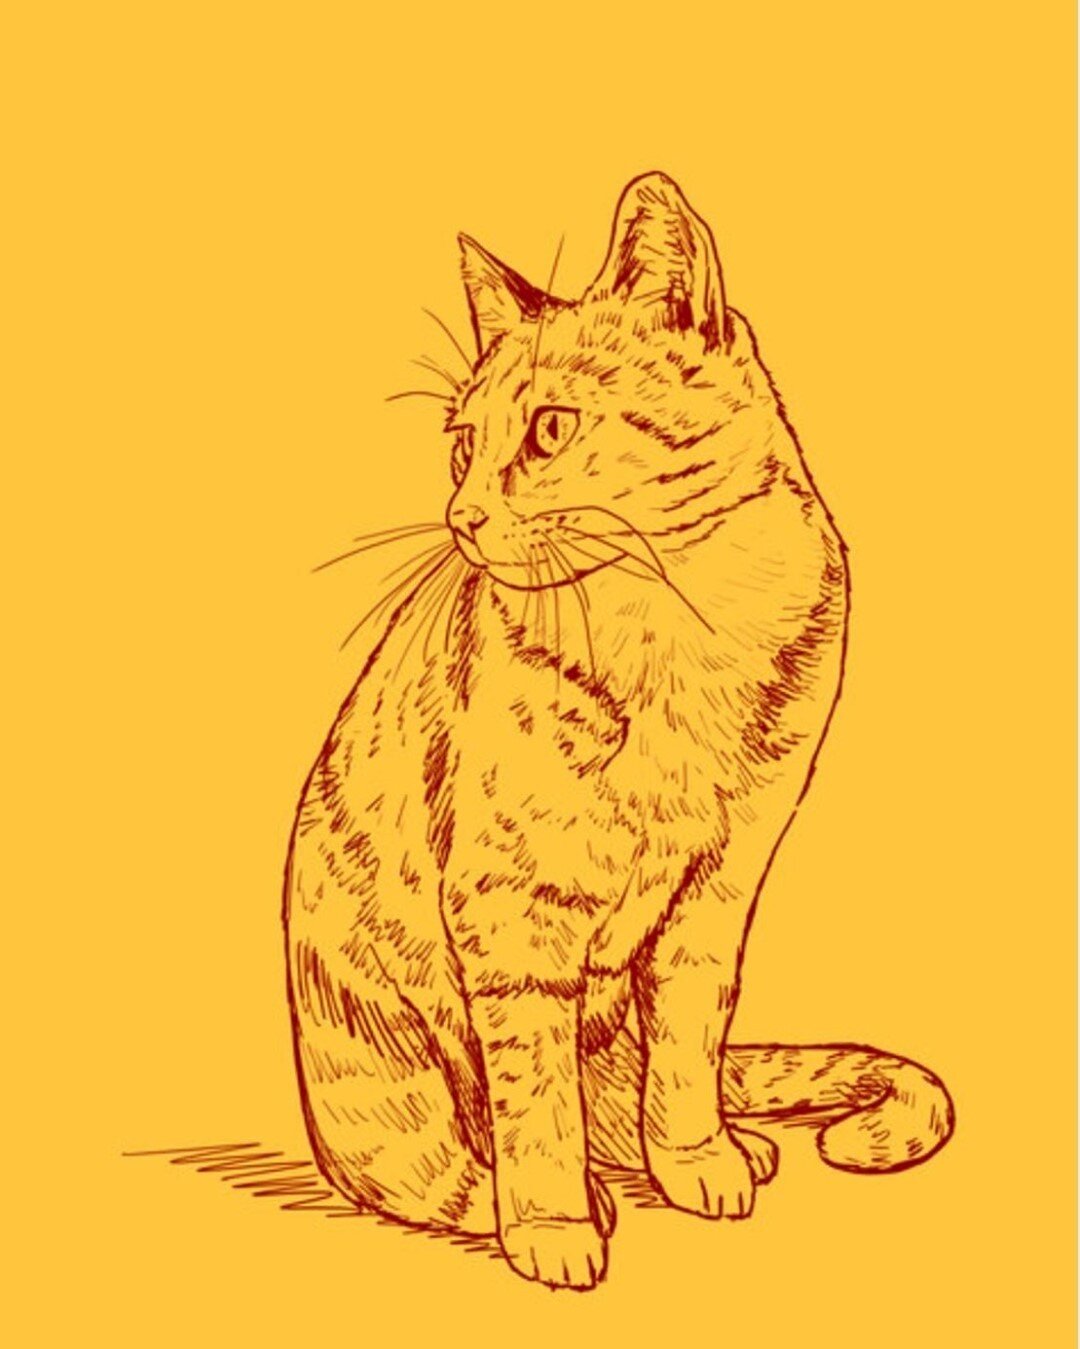 ✨😺I use to struggle so much when I would draw cats - I always ended up making them look like dogs 😆⁣
⁣
Drawing is like anything, the more you practice - the better you get! I started having more and more commissions come in requesting cats, and I k